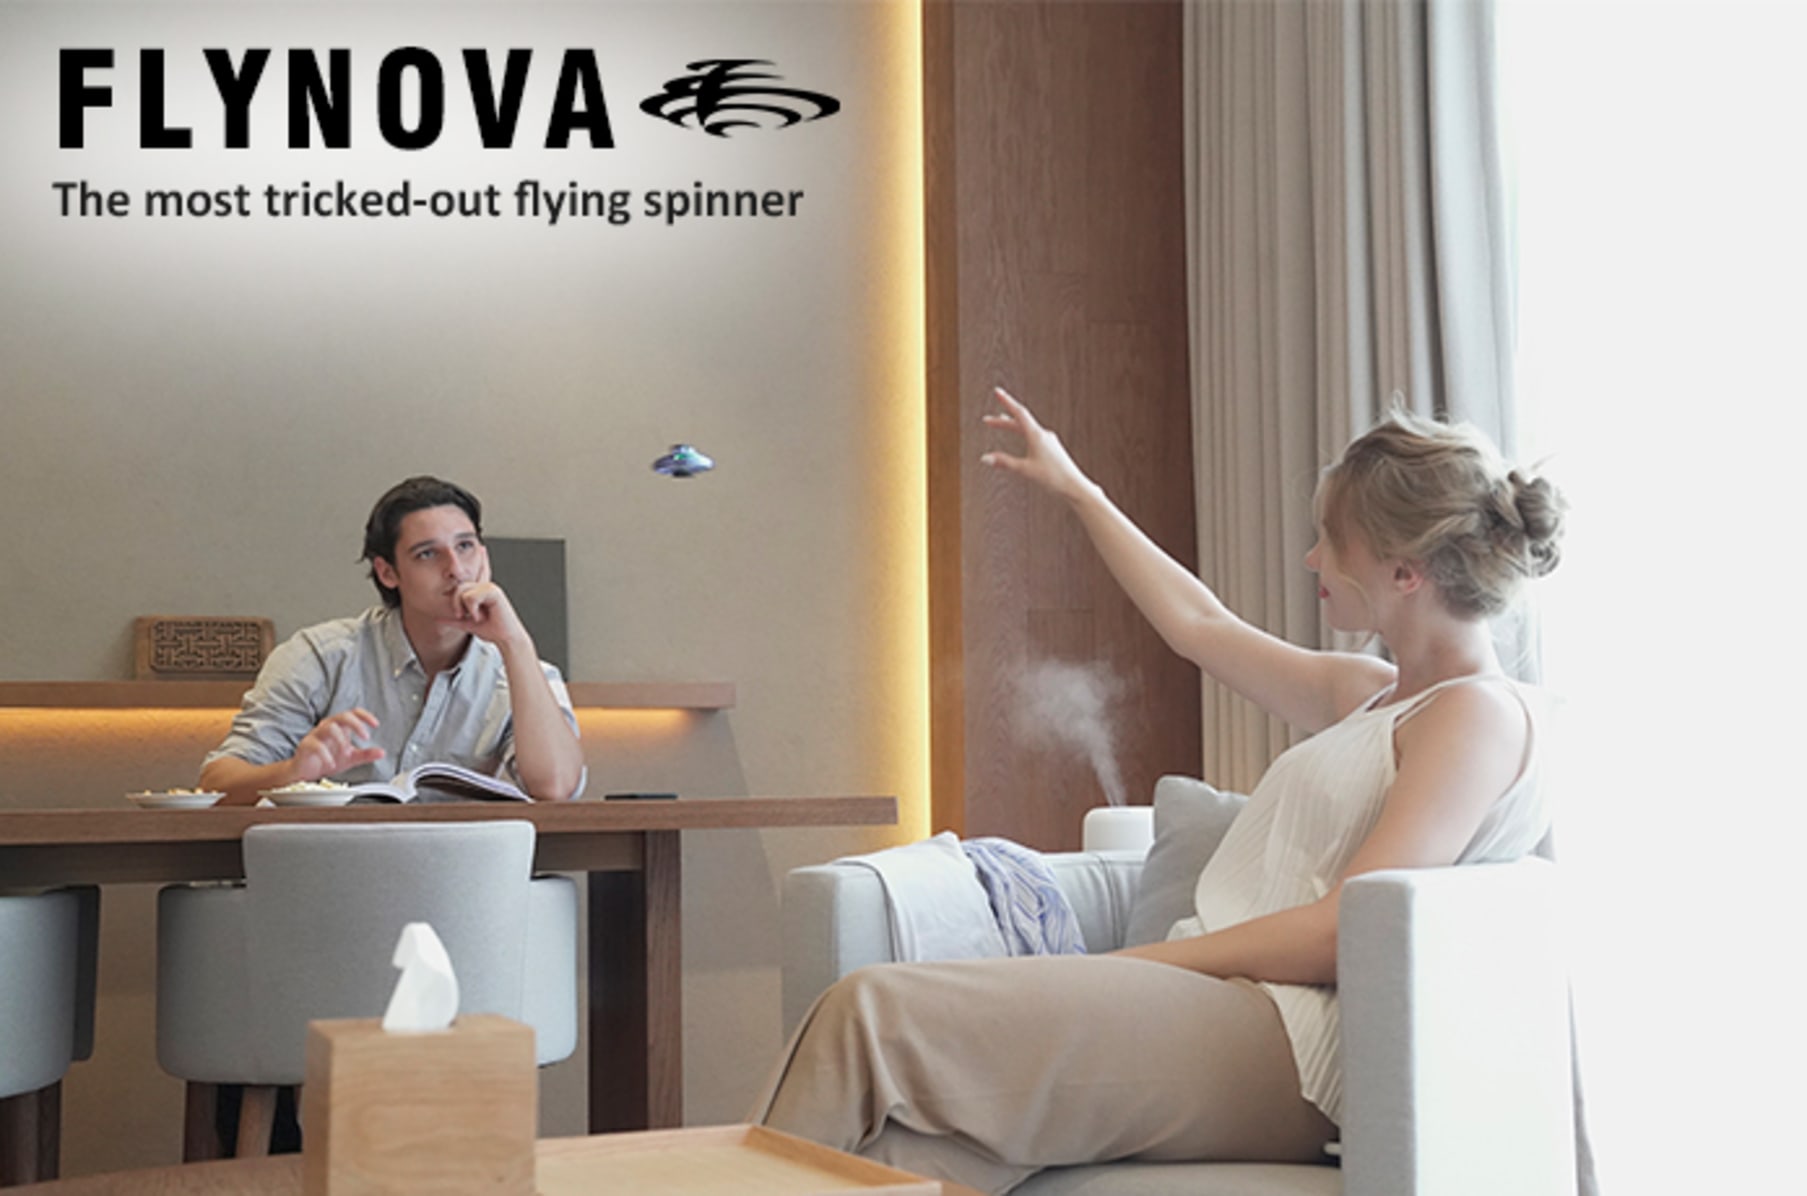 The most tricked-out flying spinner